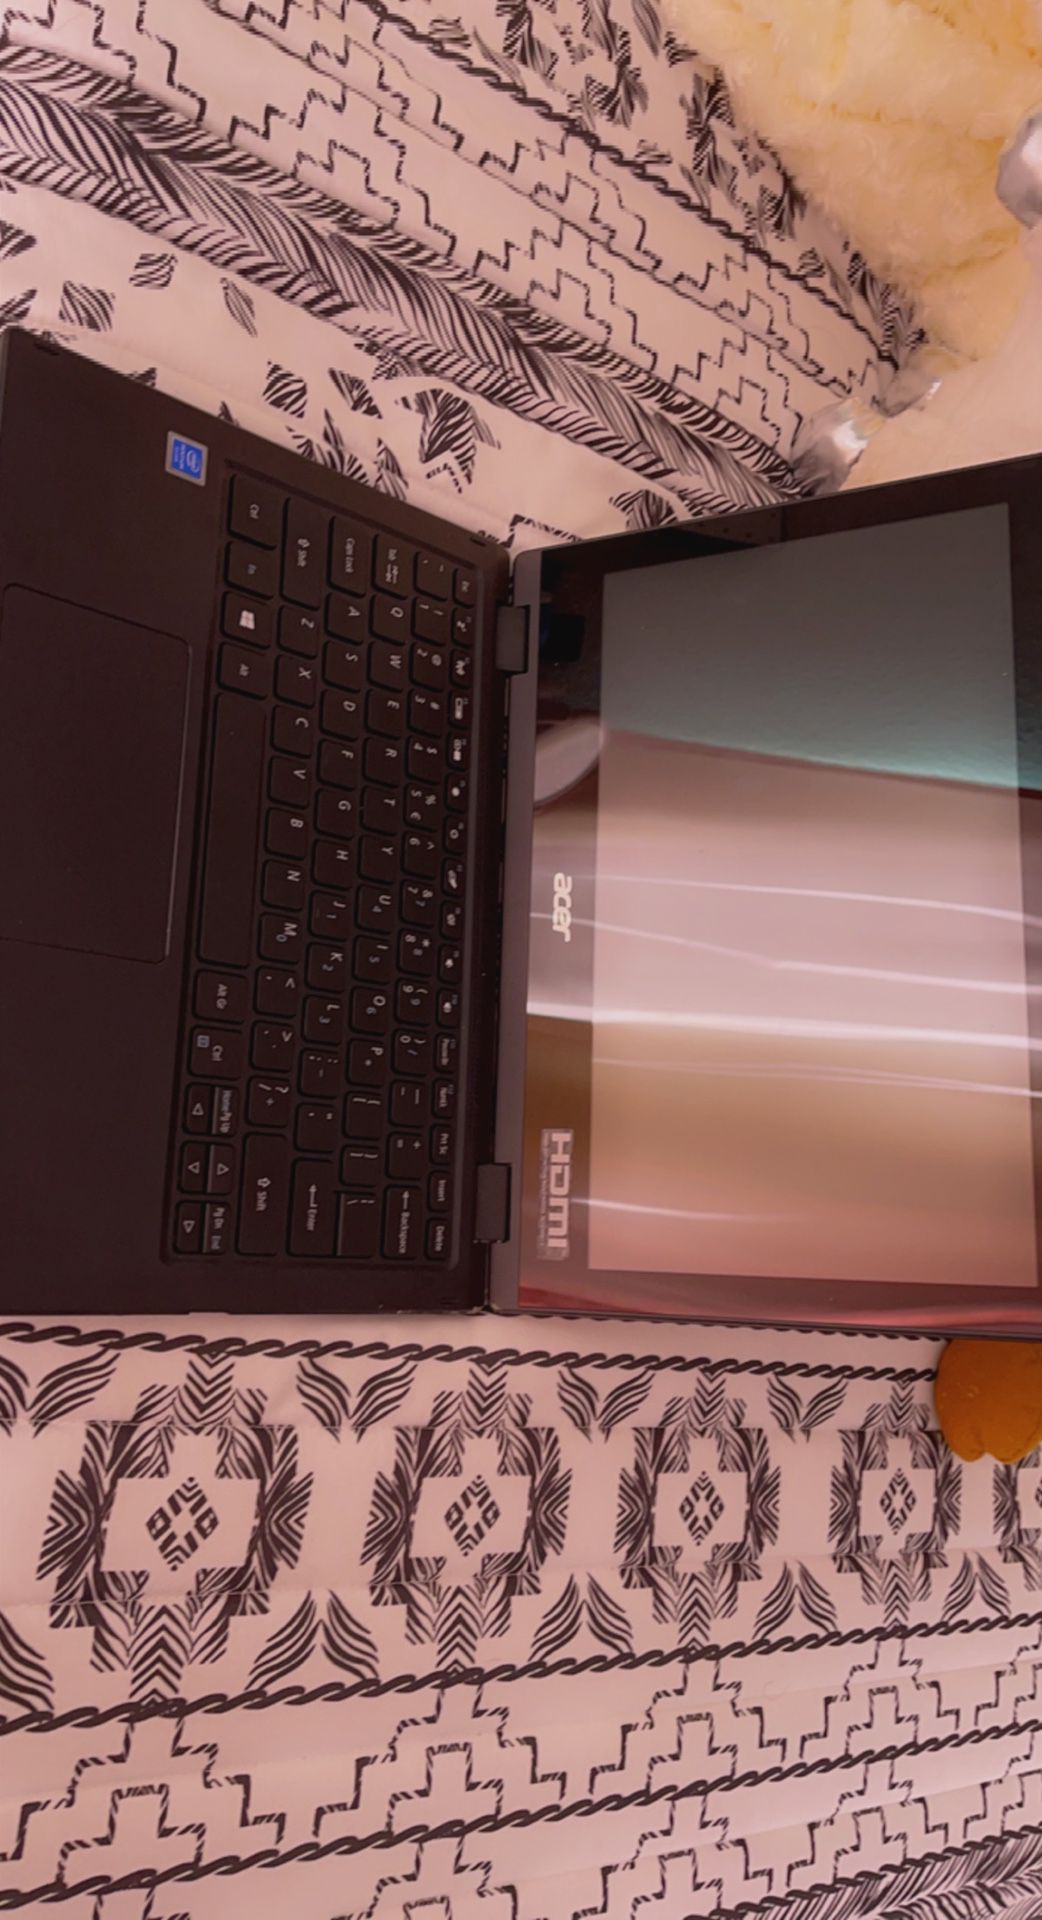 acer Touchscreen Laptop, Folds Into A Tablet As Well. 